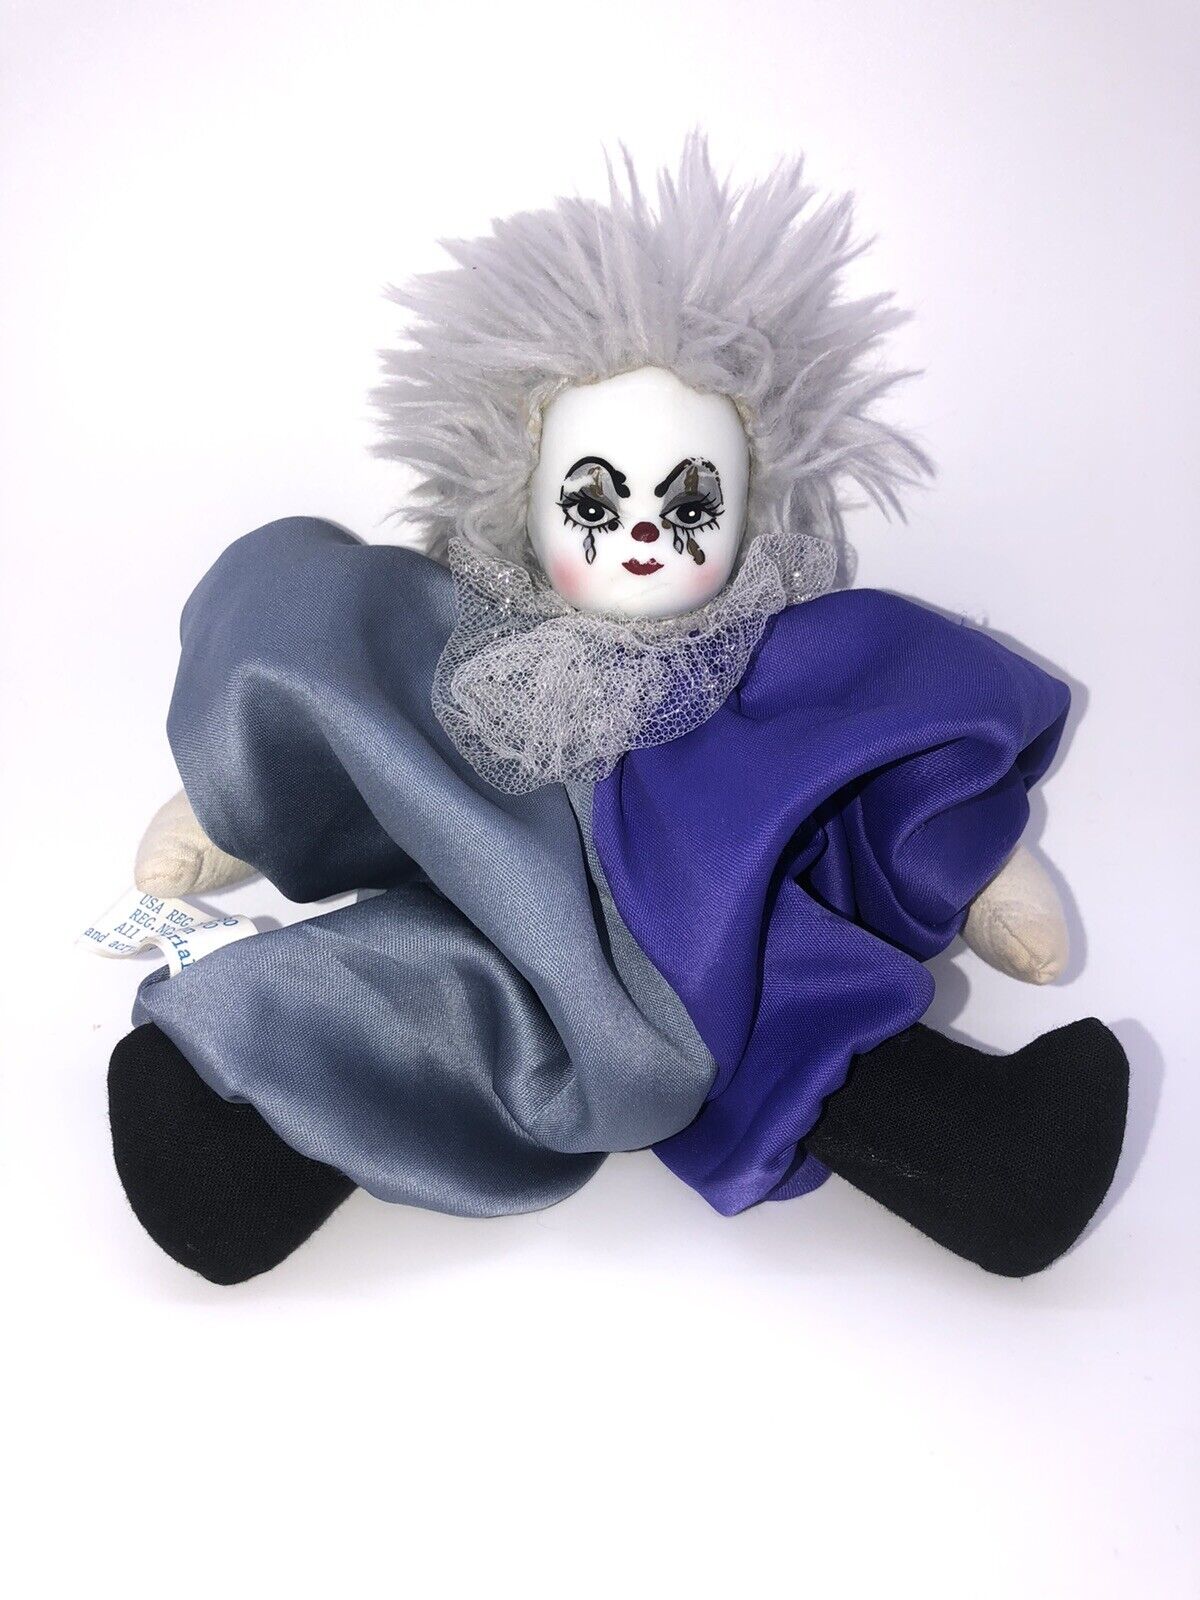 Clown Doll With Grey Hair Purple And Grey Suit - House Of Global Art 1983